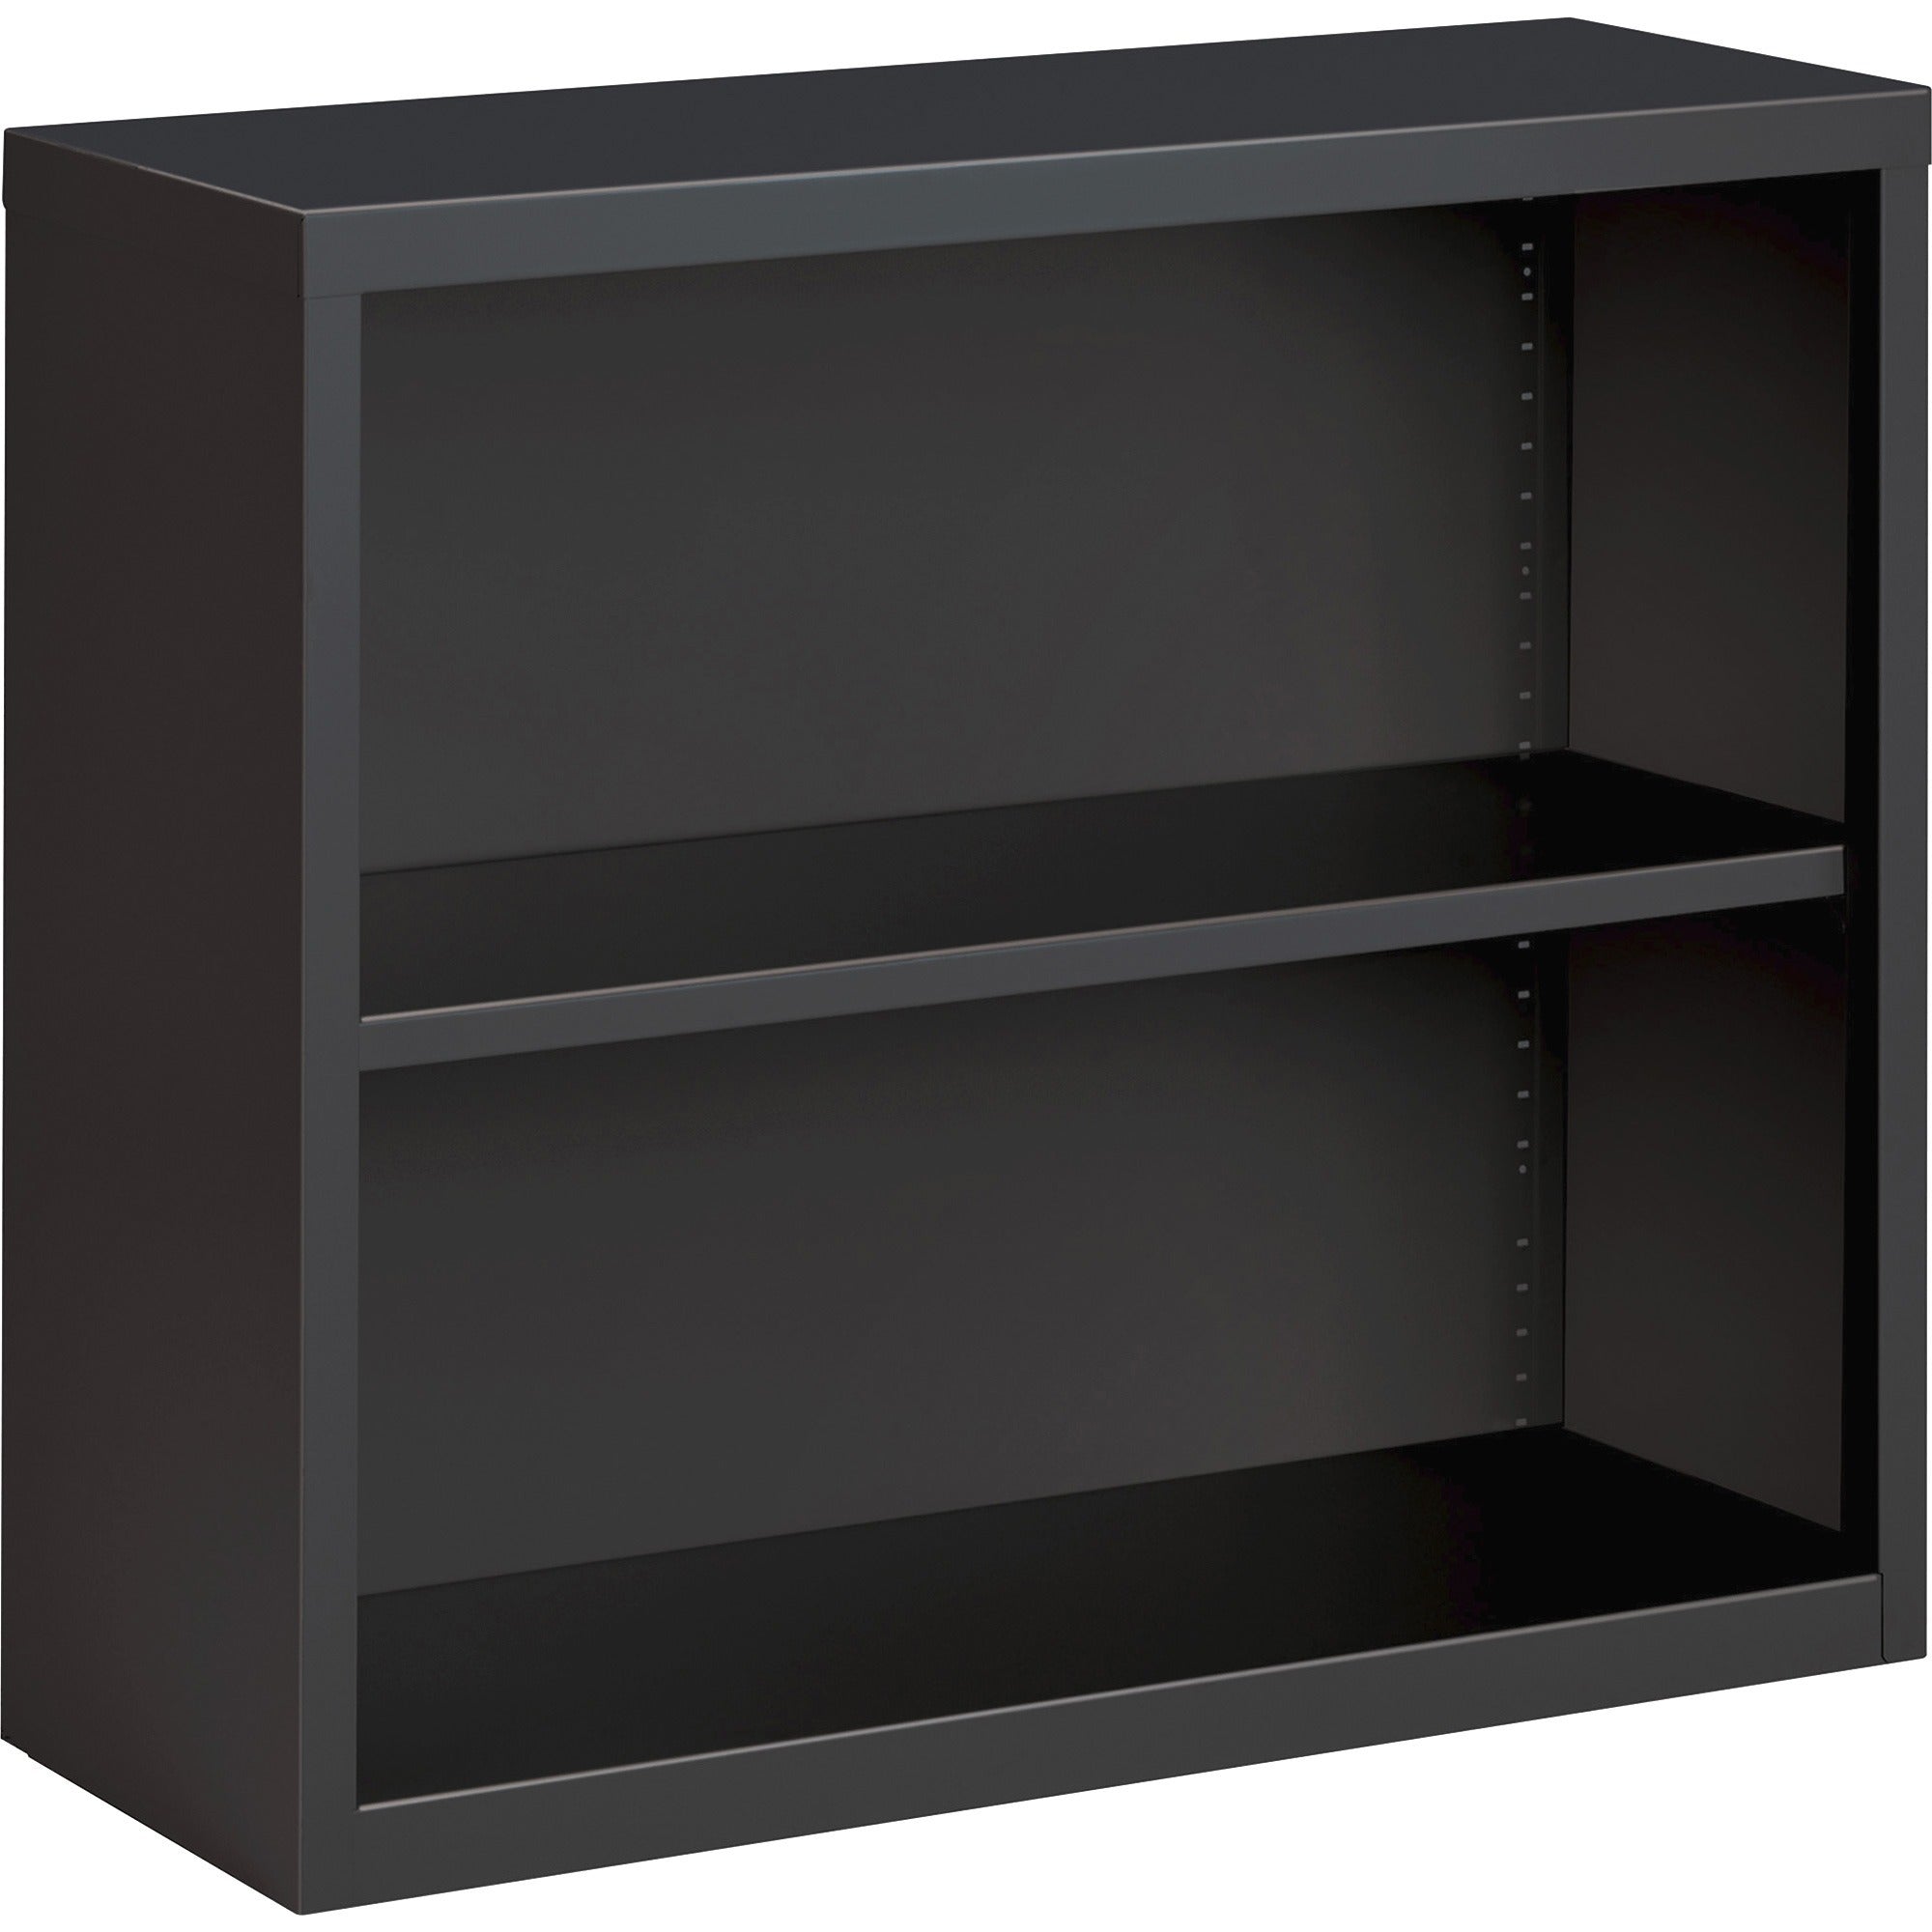 lorell-fortress-series-bookcase-345-x-12630-2-shelves-material-steel-finish-charcoal-powder-coated-adjustable-shelf-welded-durable_llr59691 - 1